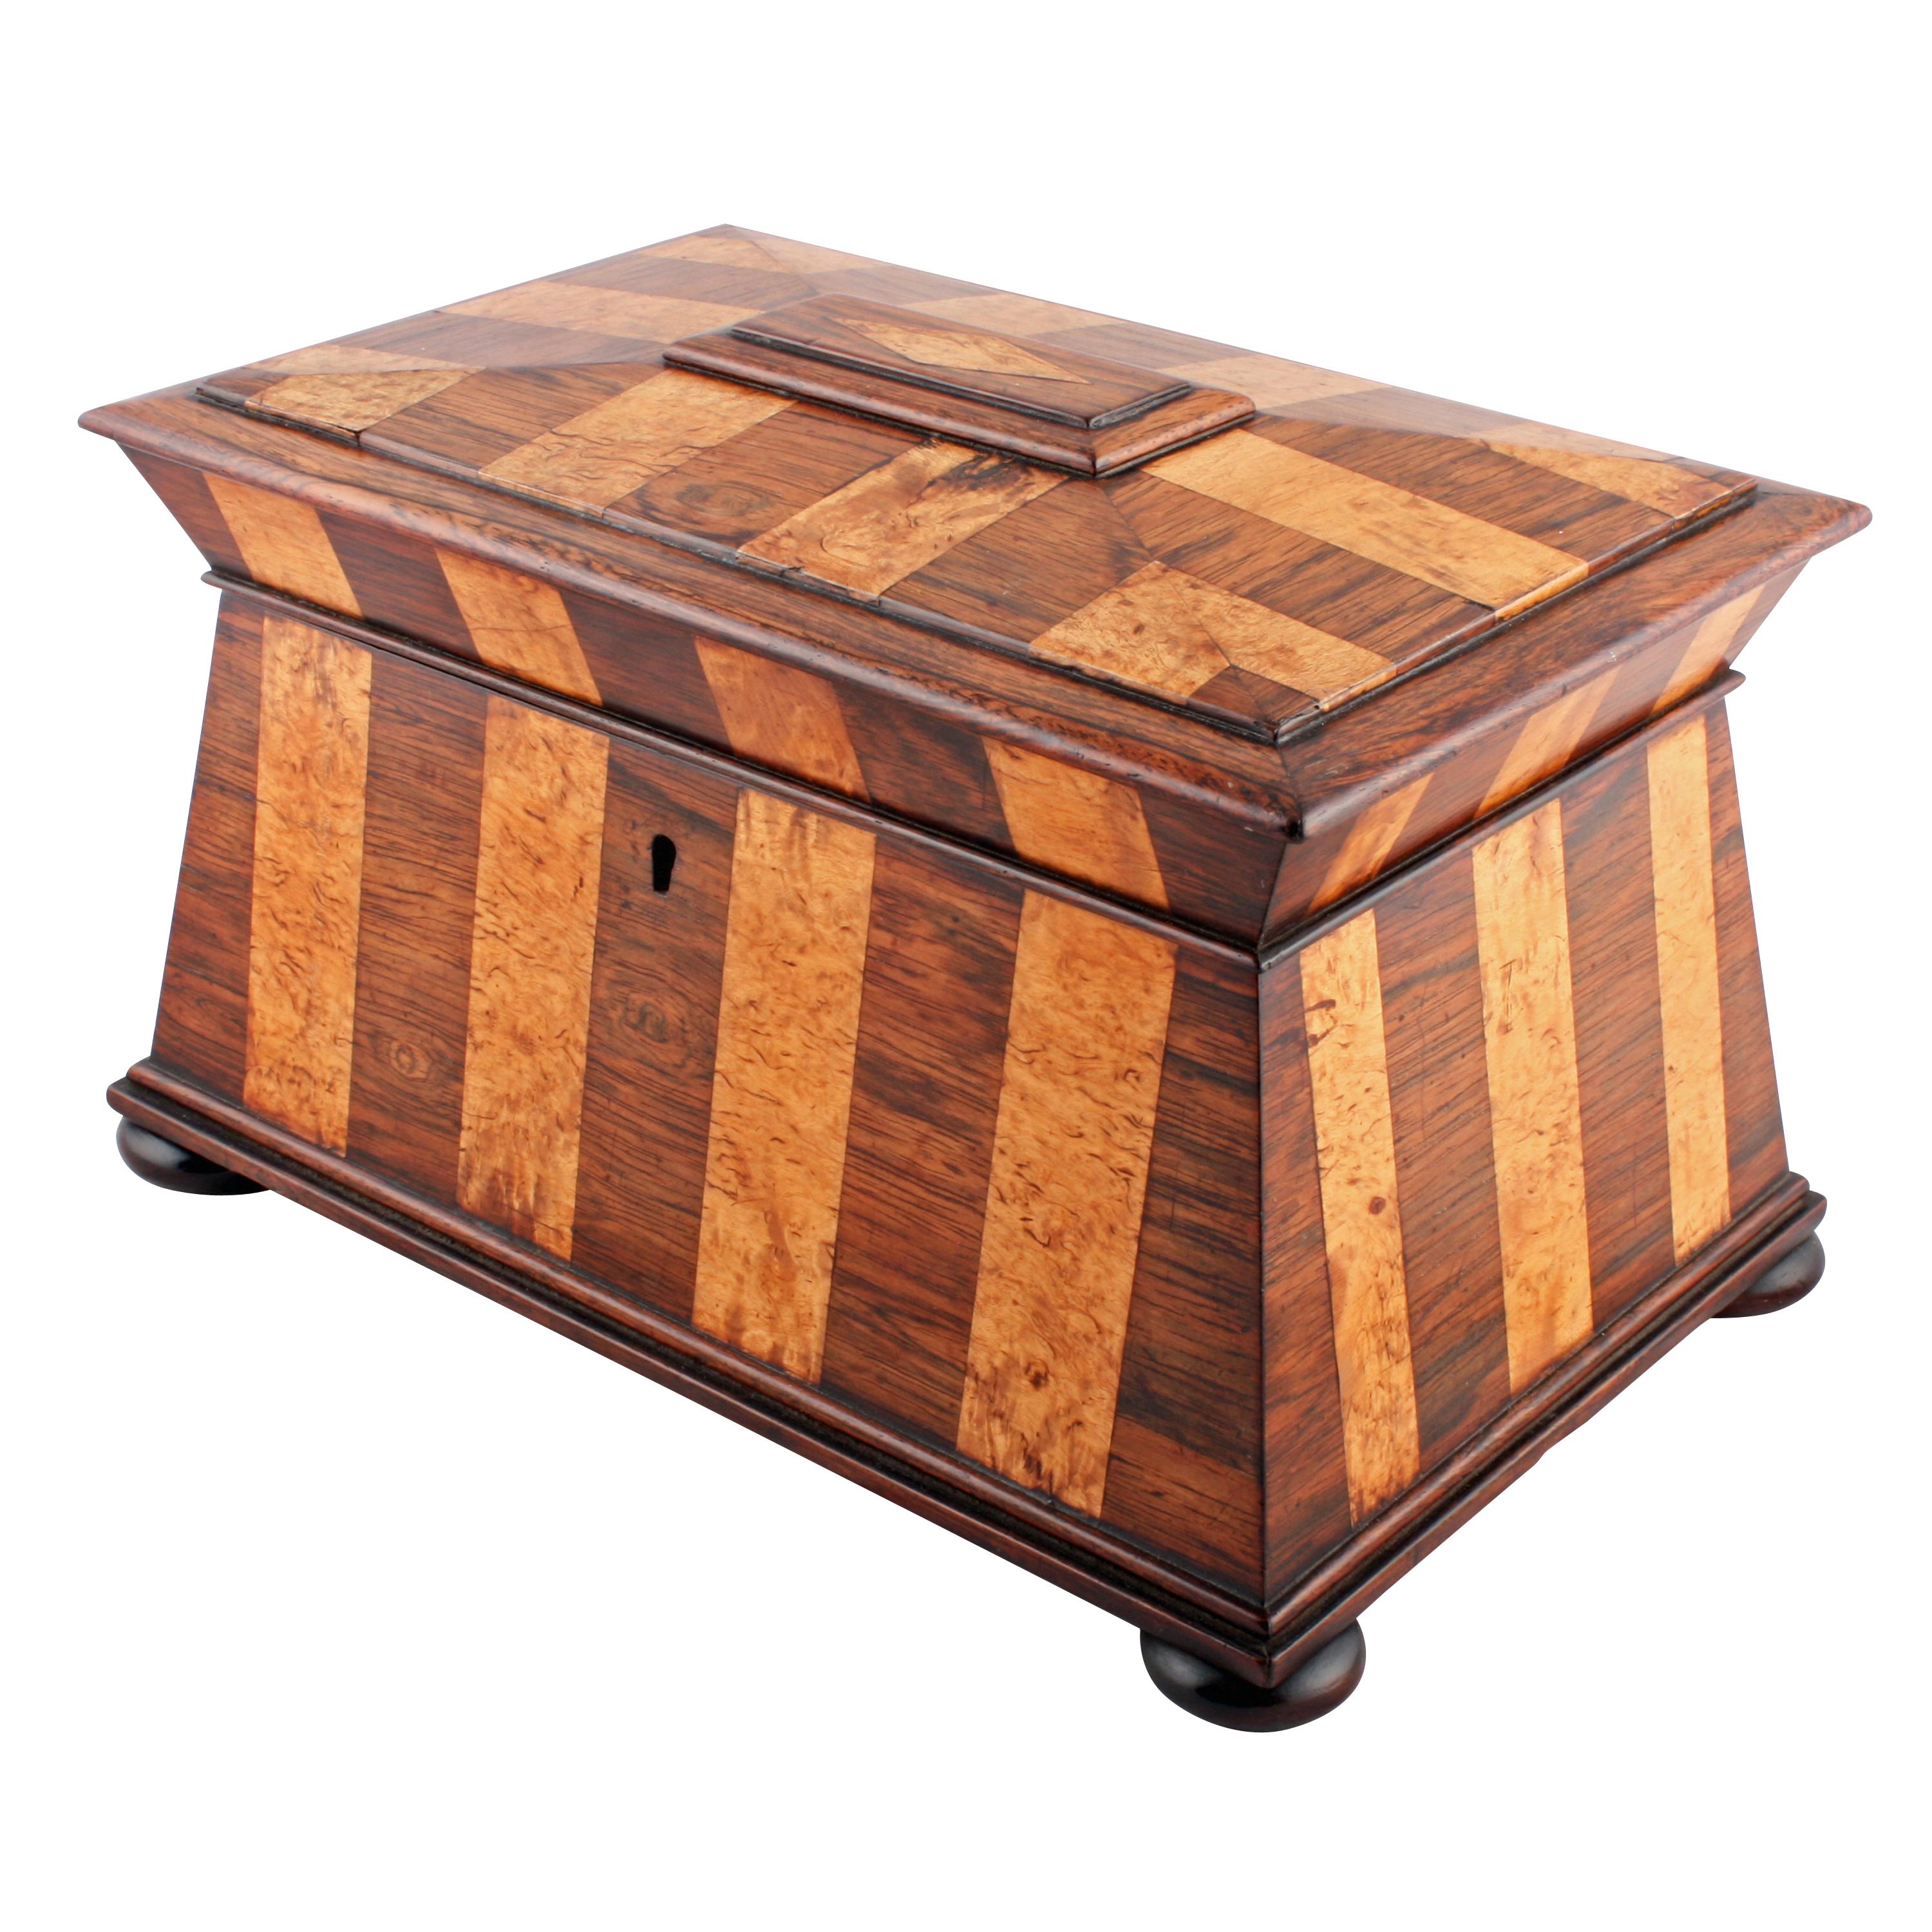 Rosewood and karellian birch tea caddy.


A William IV rosewood and karellian birch veneered sarcophagus shaped tea caddy.

The caddy is mostly rosewood with panels of karellian birch veneer inside and out.

The caddy is raised on flat bun